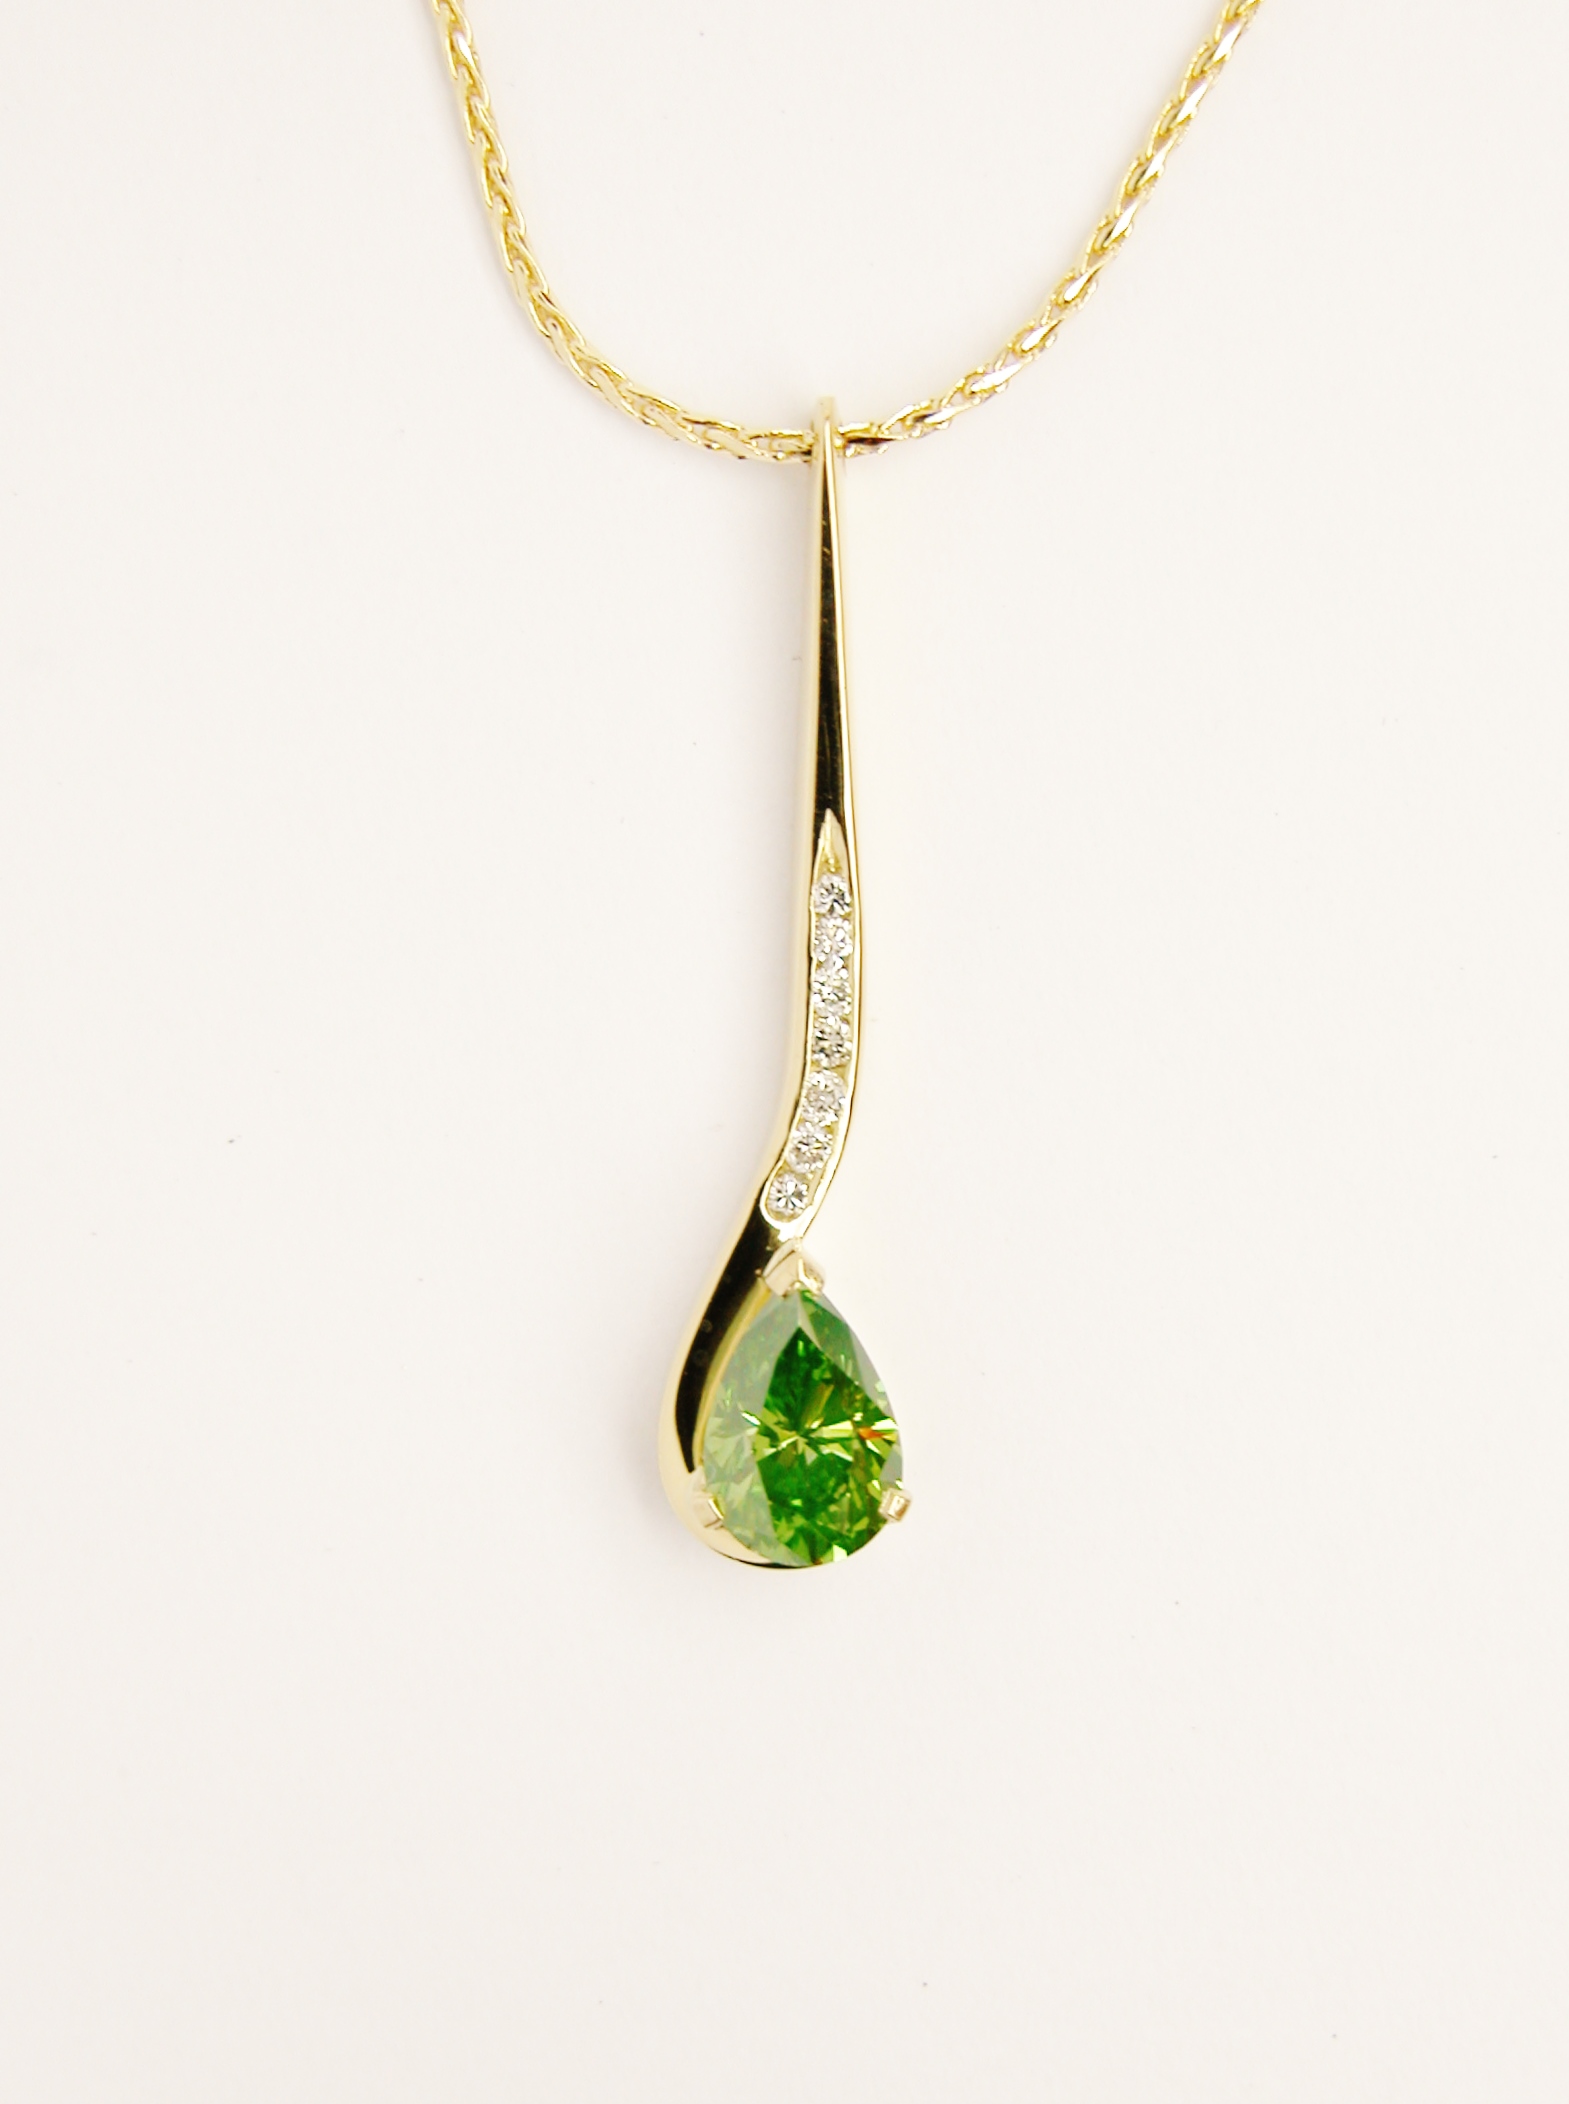 Olive coloured Pear shaped diamond and round brilliant cut white diamond hook shaped pendulum style pendant mounted in 18ct. yellow gold.